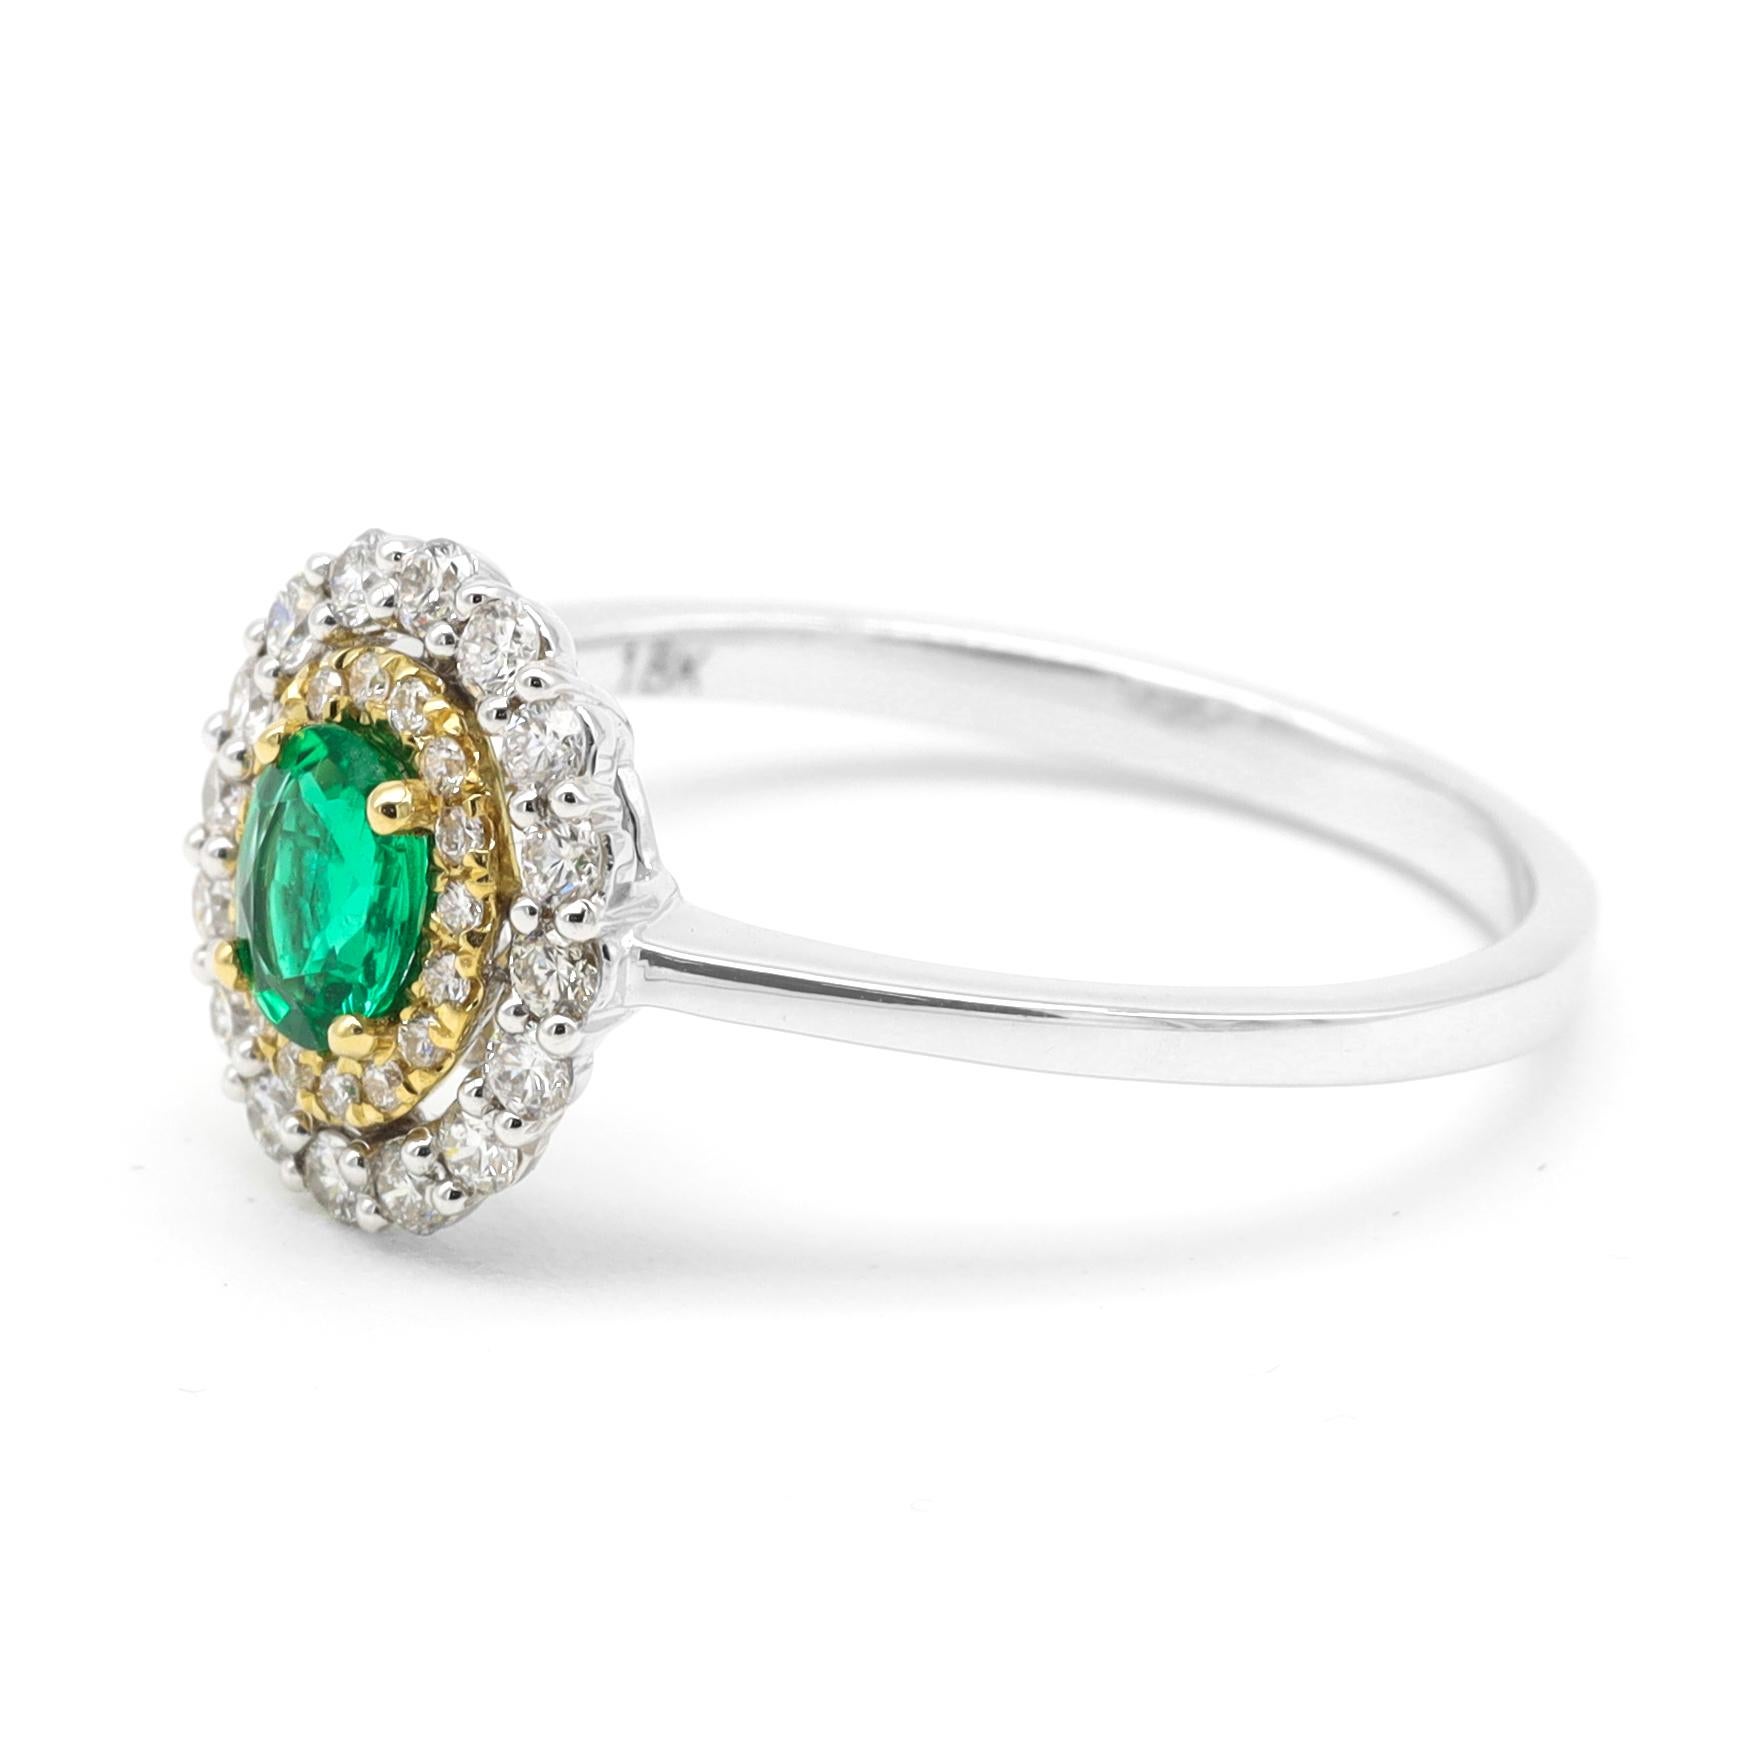 18 Karat Gold Natural Emerald and Diamond Double Cluster Ring

This illuminating spring green oval emerald and double cluster diamond ring is keenly gratifying. The sublimely placed rich green emerald oval solitaire in the center in yellow gold